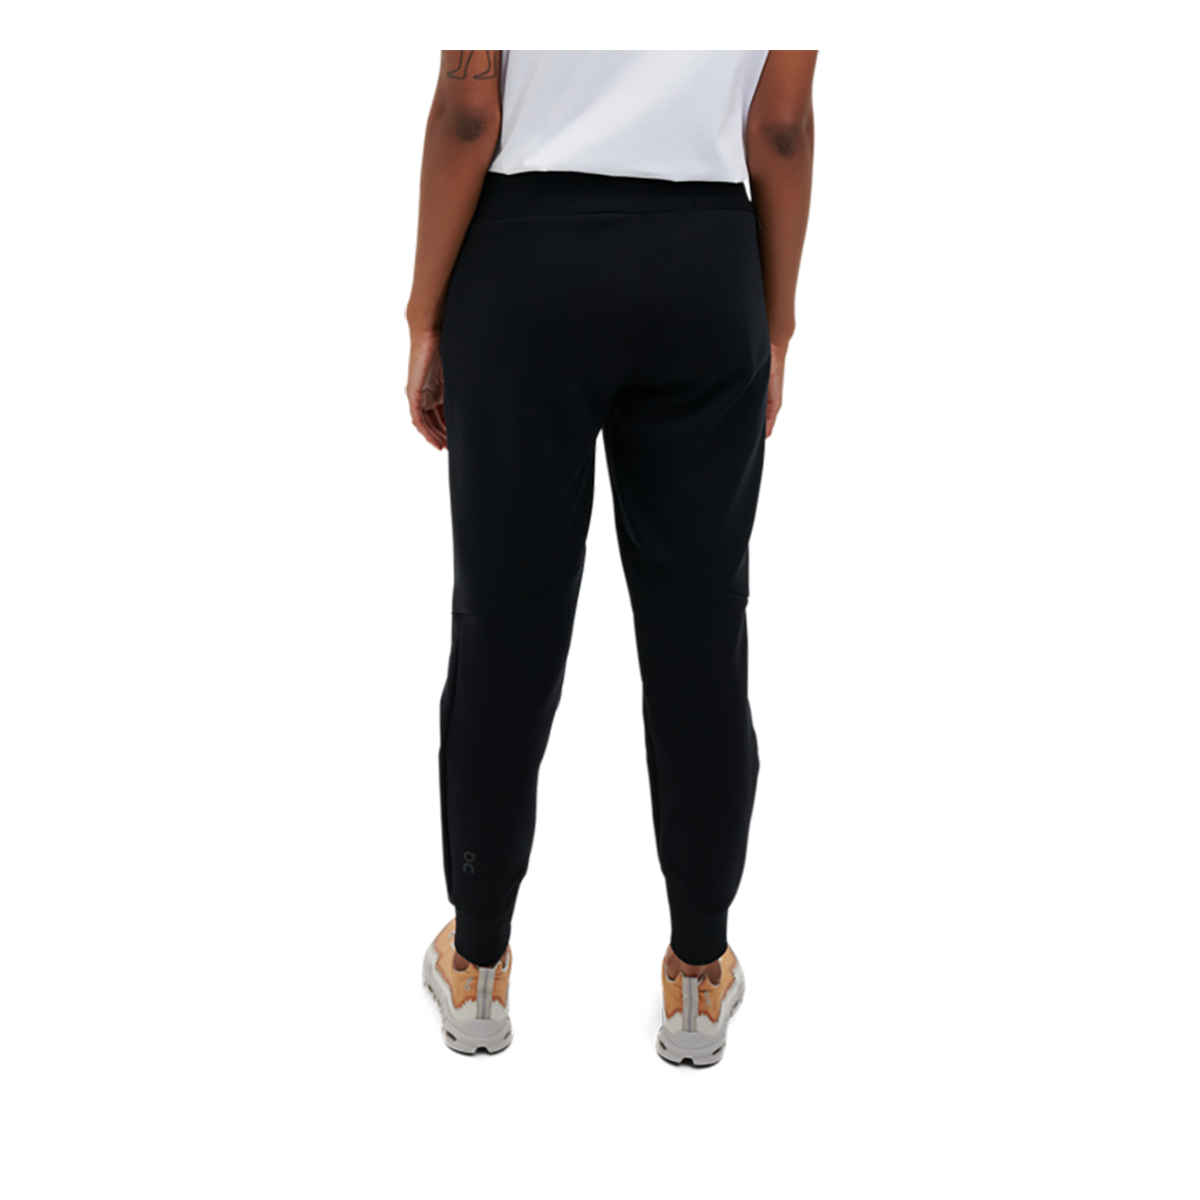 ON Sweat Pant 2, , large image number null